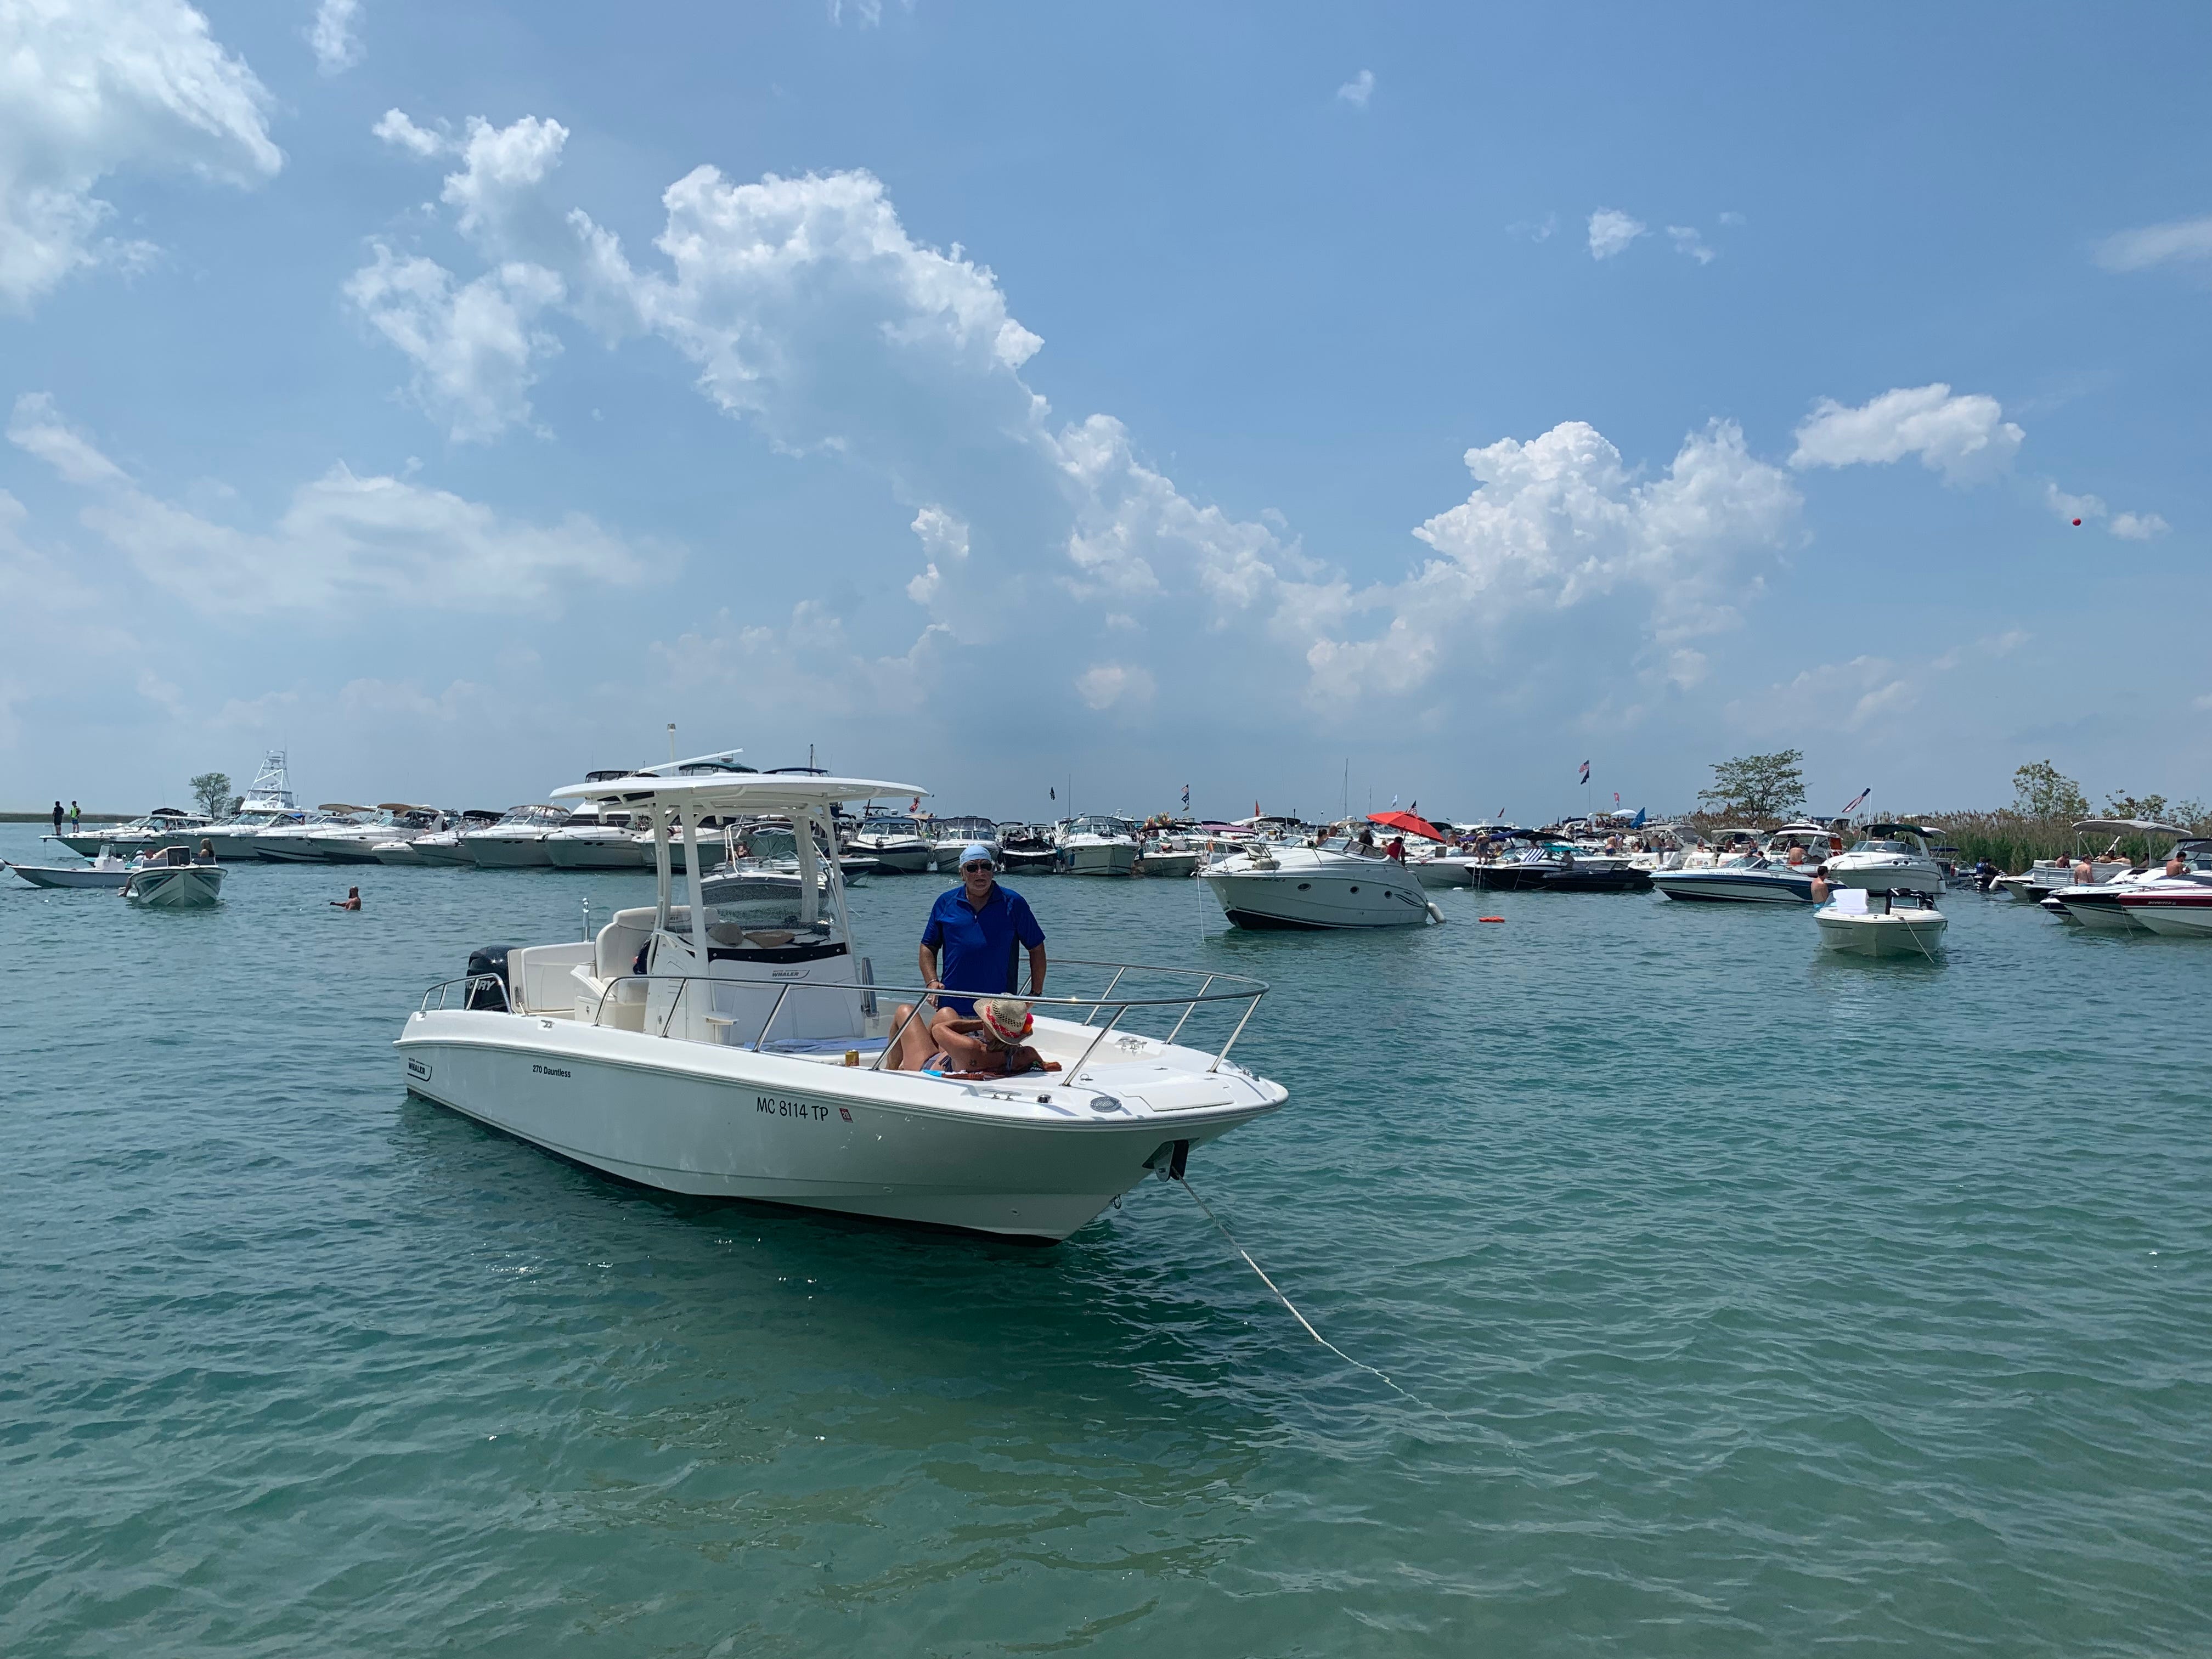 Pleasure boats sit anchored off Gull Island Friday, June 28, 2019 for this year's Lake St. Clair annual party.